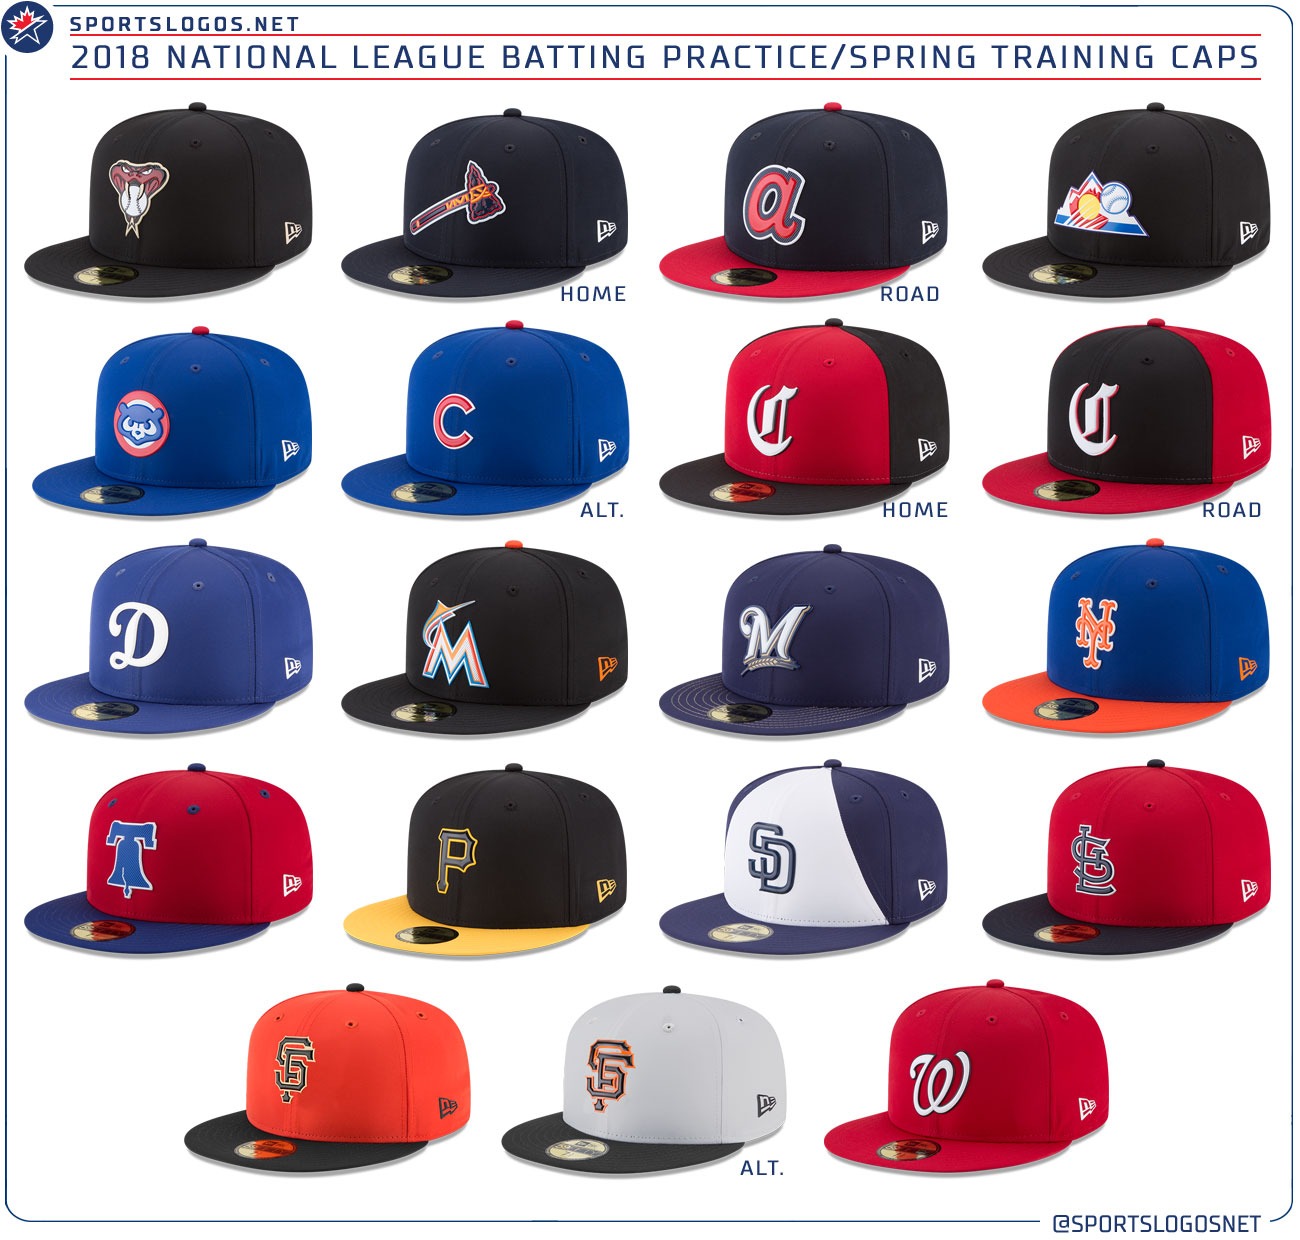 MLB Unveils New Designs, Lighter Caps for B.P. and Spring in 2018